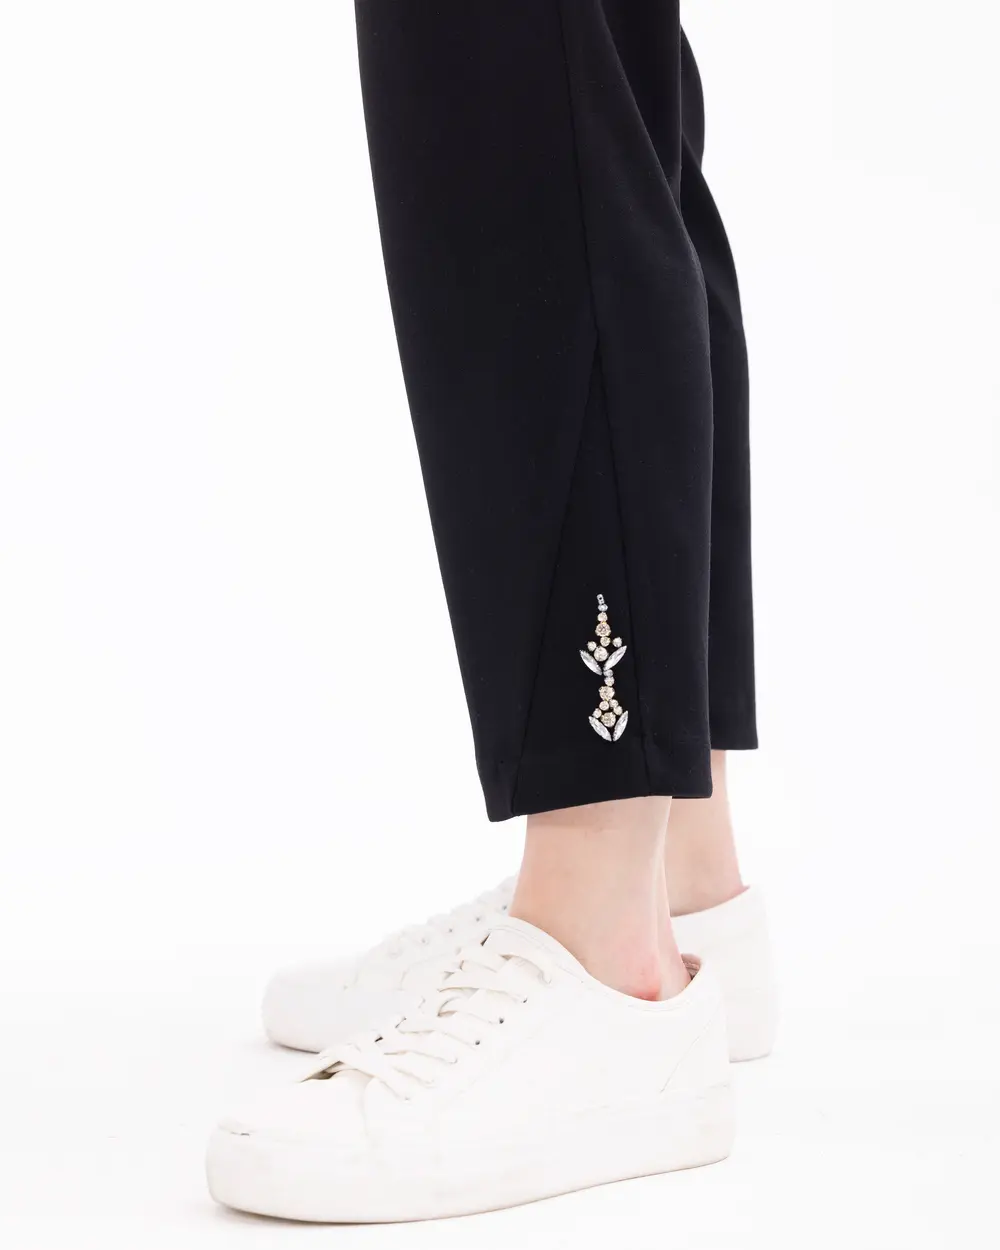 Stone Embroidered Elastic Waist Trousers